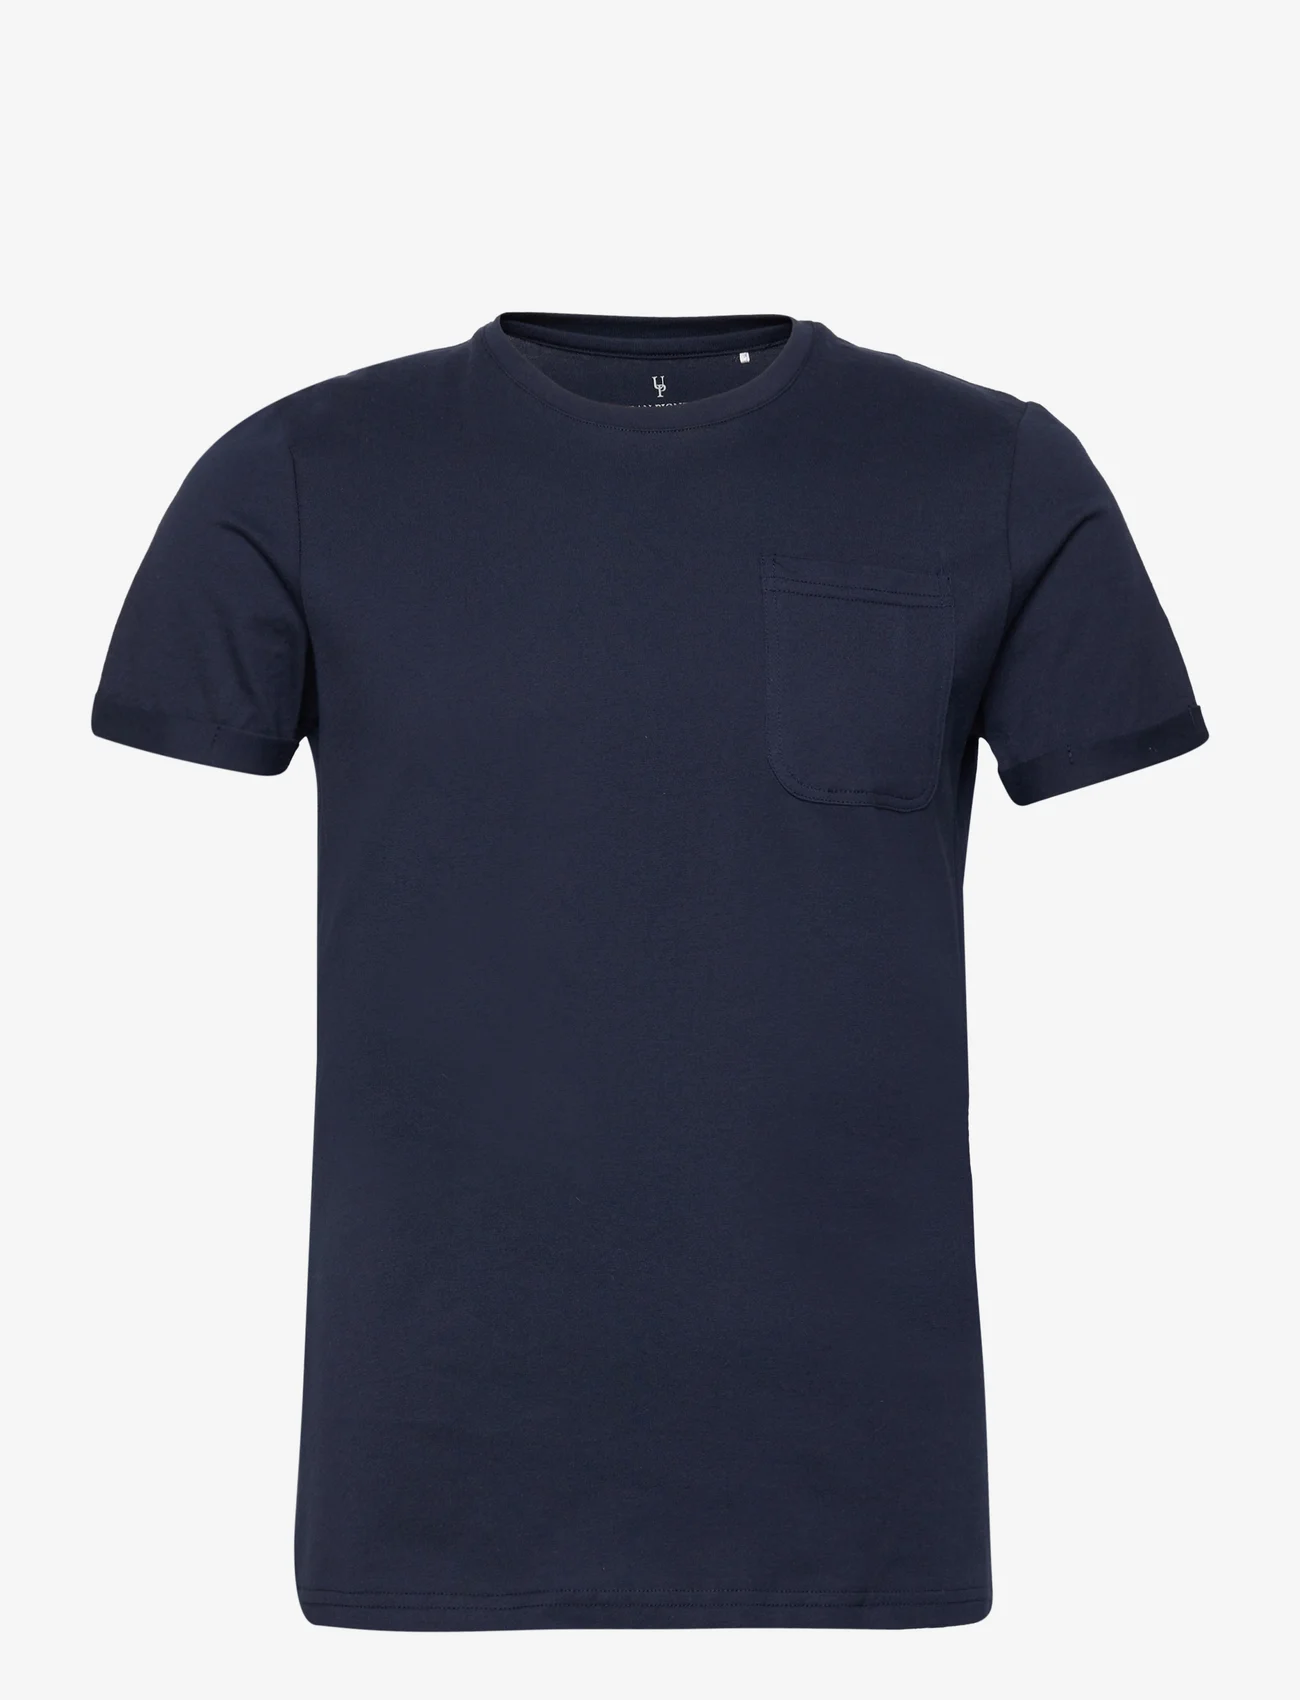 Urban Pioneers - Andre Tee - basic t-shirts - navy - 0